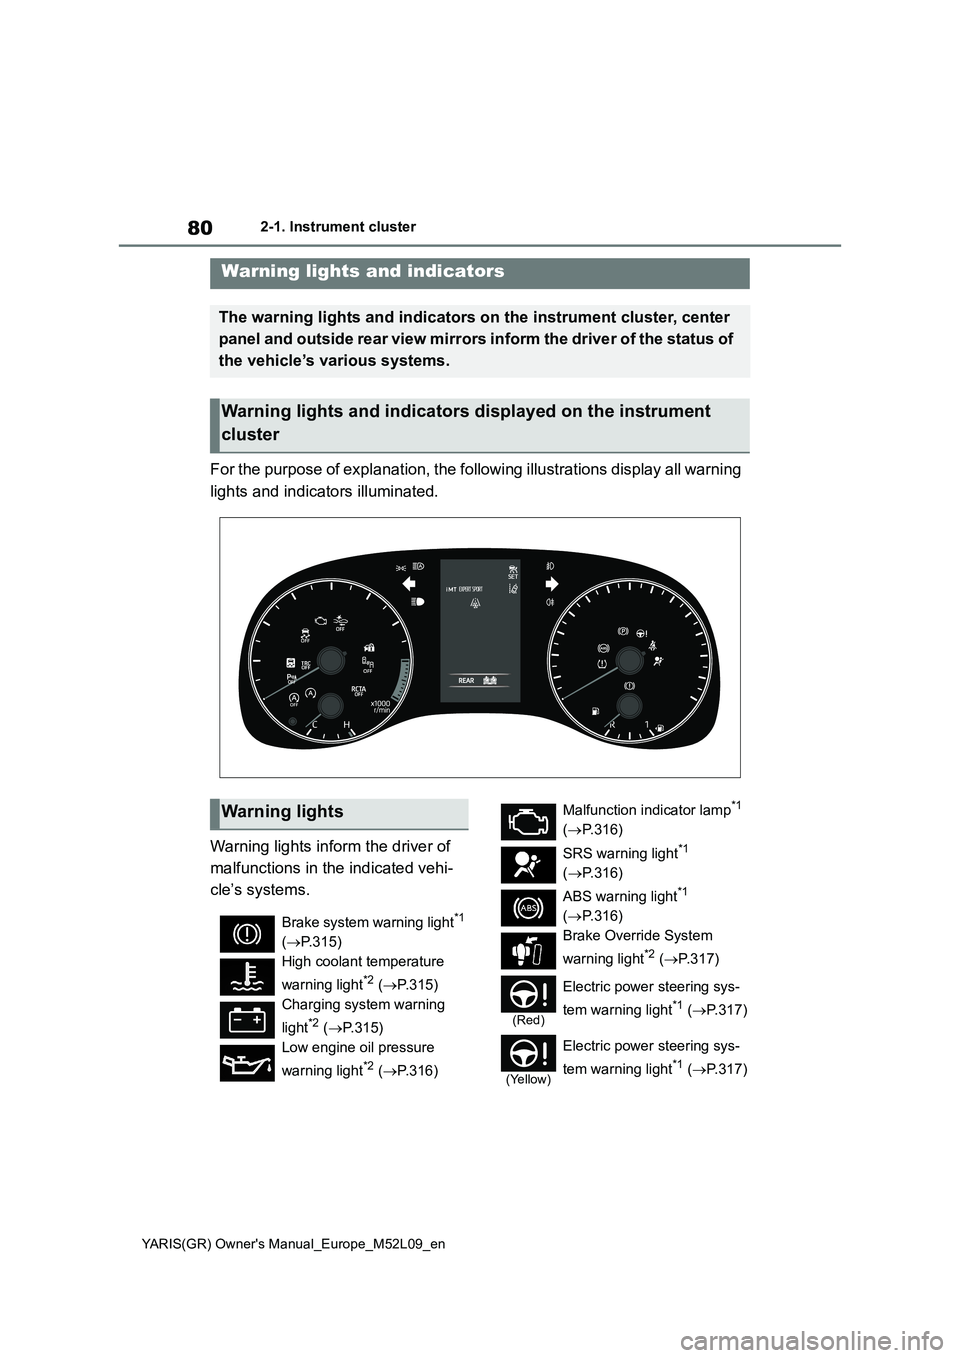 TOYOTA GR YARIS 2021  Owners Manual 80
YARIS(GR) Owners Manual_Europe_M52L09_en
2-1. Instrument cluster
2-1.In strument clu ste r
For the purpose of explanation, the following illustrations display all warning  
lights and indicators i